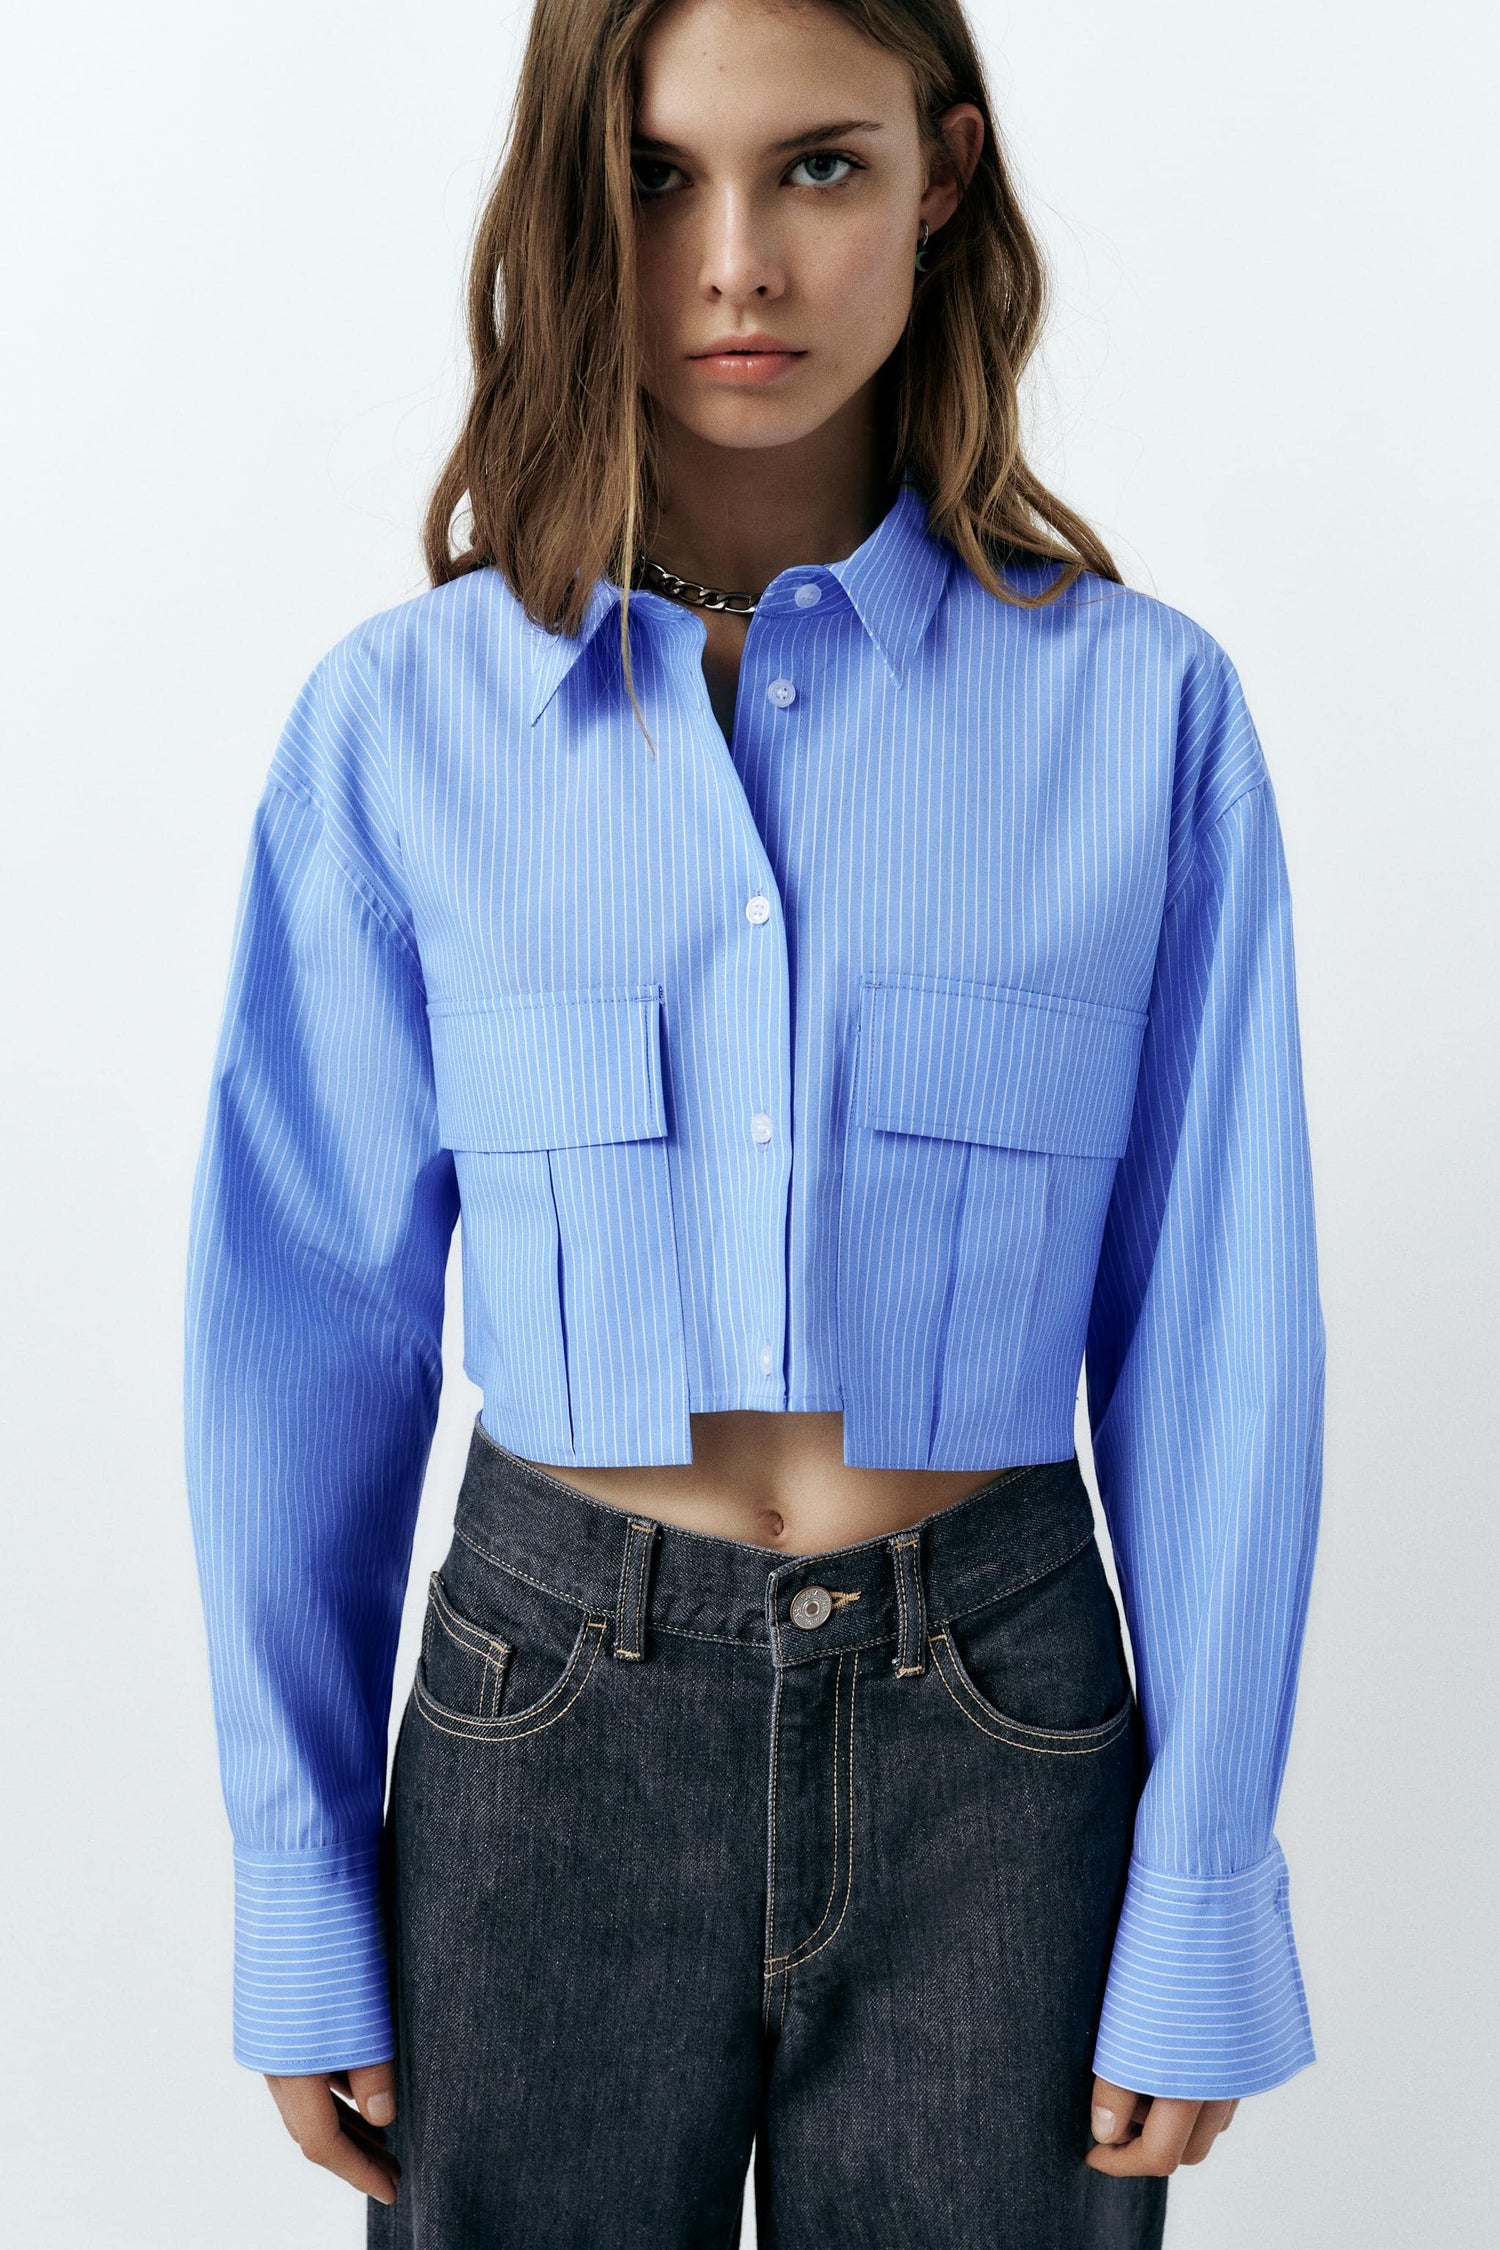 PINSTRIPE CROP SHIRT,blue, button, casual, collared, cotton, crop, long sleeves, oversized, patch pocket, pinstripe, printed, shirts, streetwear, stripes, topwear, utility pocket, woven,crop-relaxed-fit-stripes-blue-shirt,Neck - Shirt collar 
 Sleeve - Long sleeves
 Fit - Relaxed fit
 Print/Pattern - Stripes
 Color - Blue and white
 Material - Poly cotton 
 Detail - Front flap patch pockets